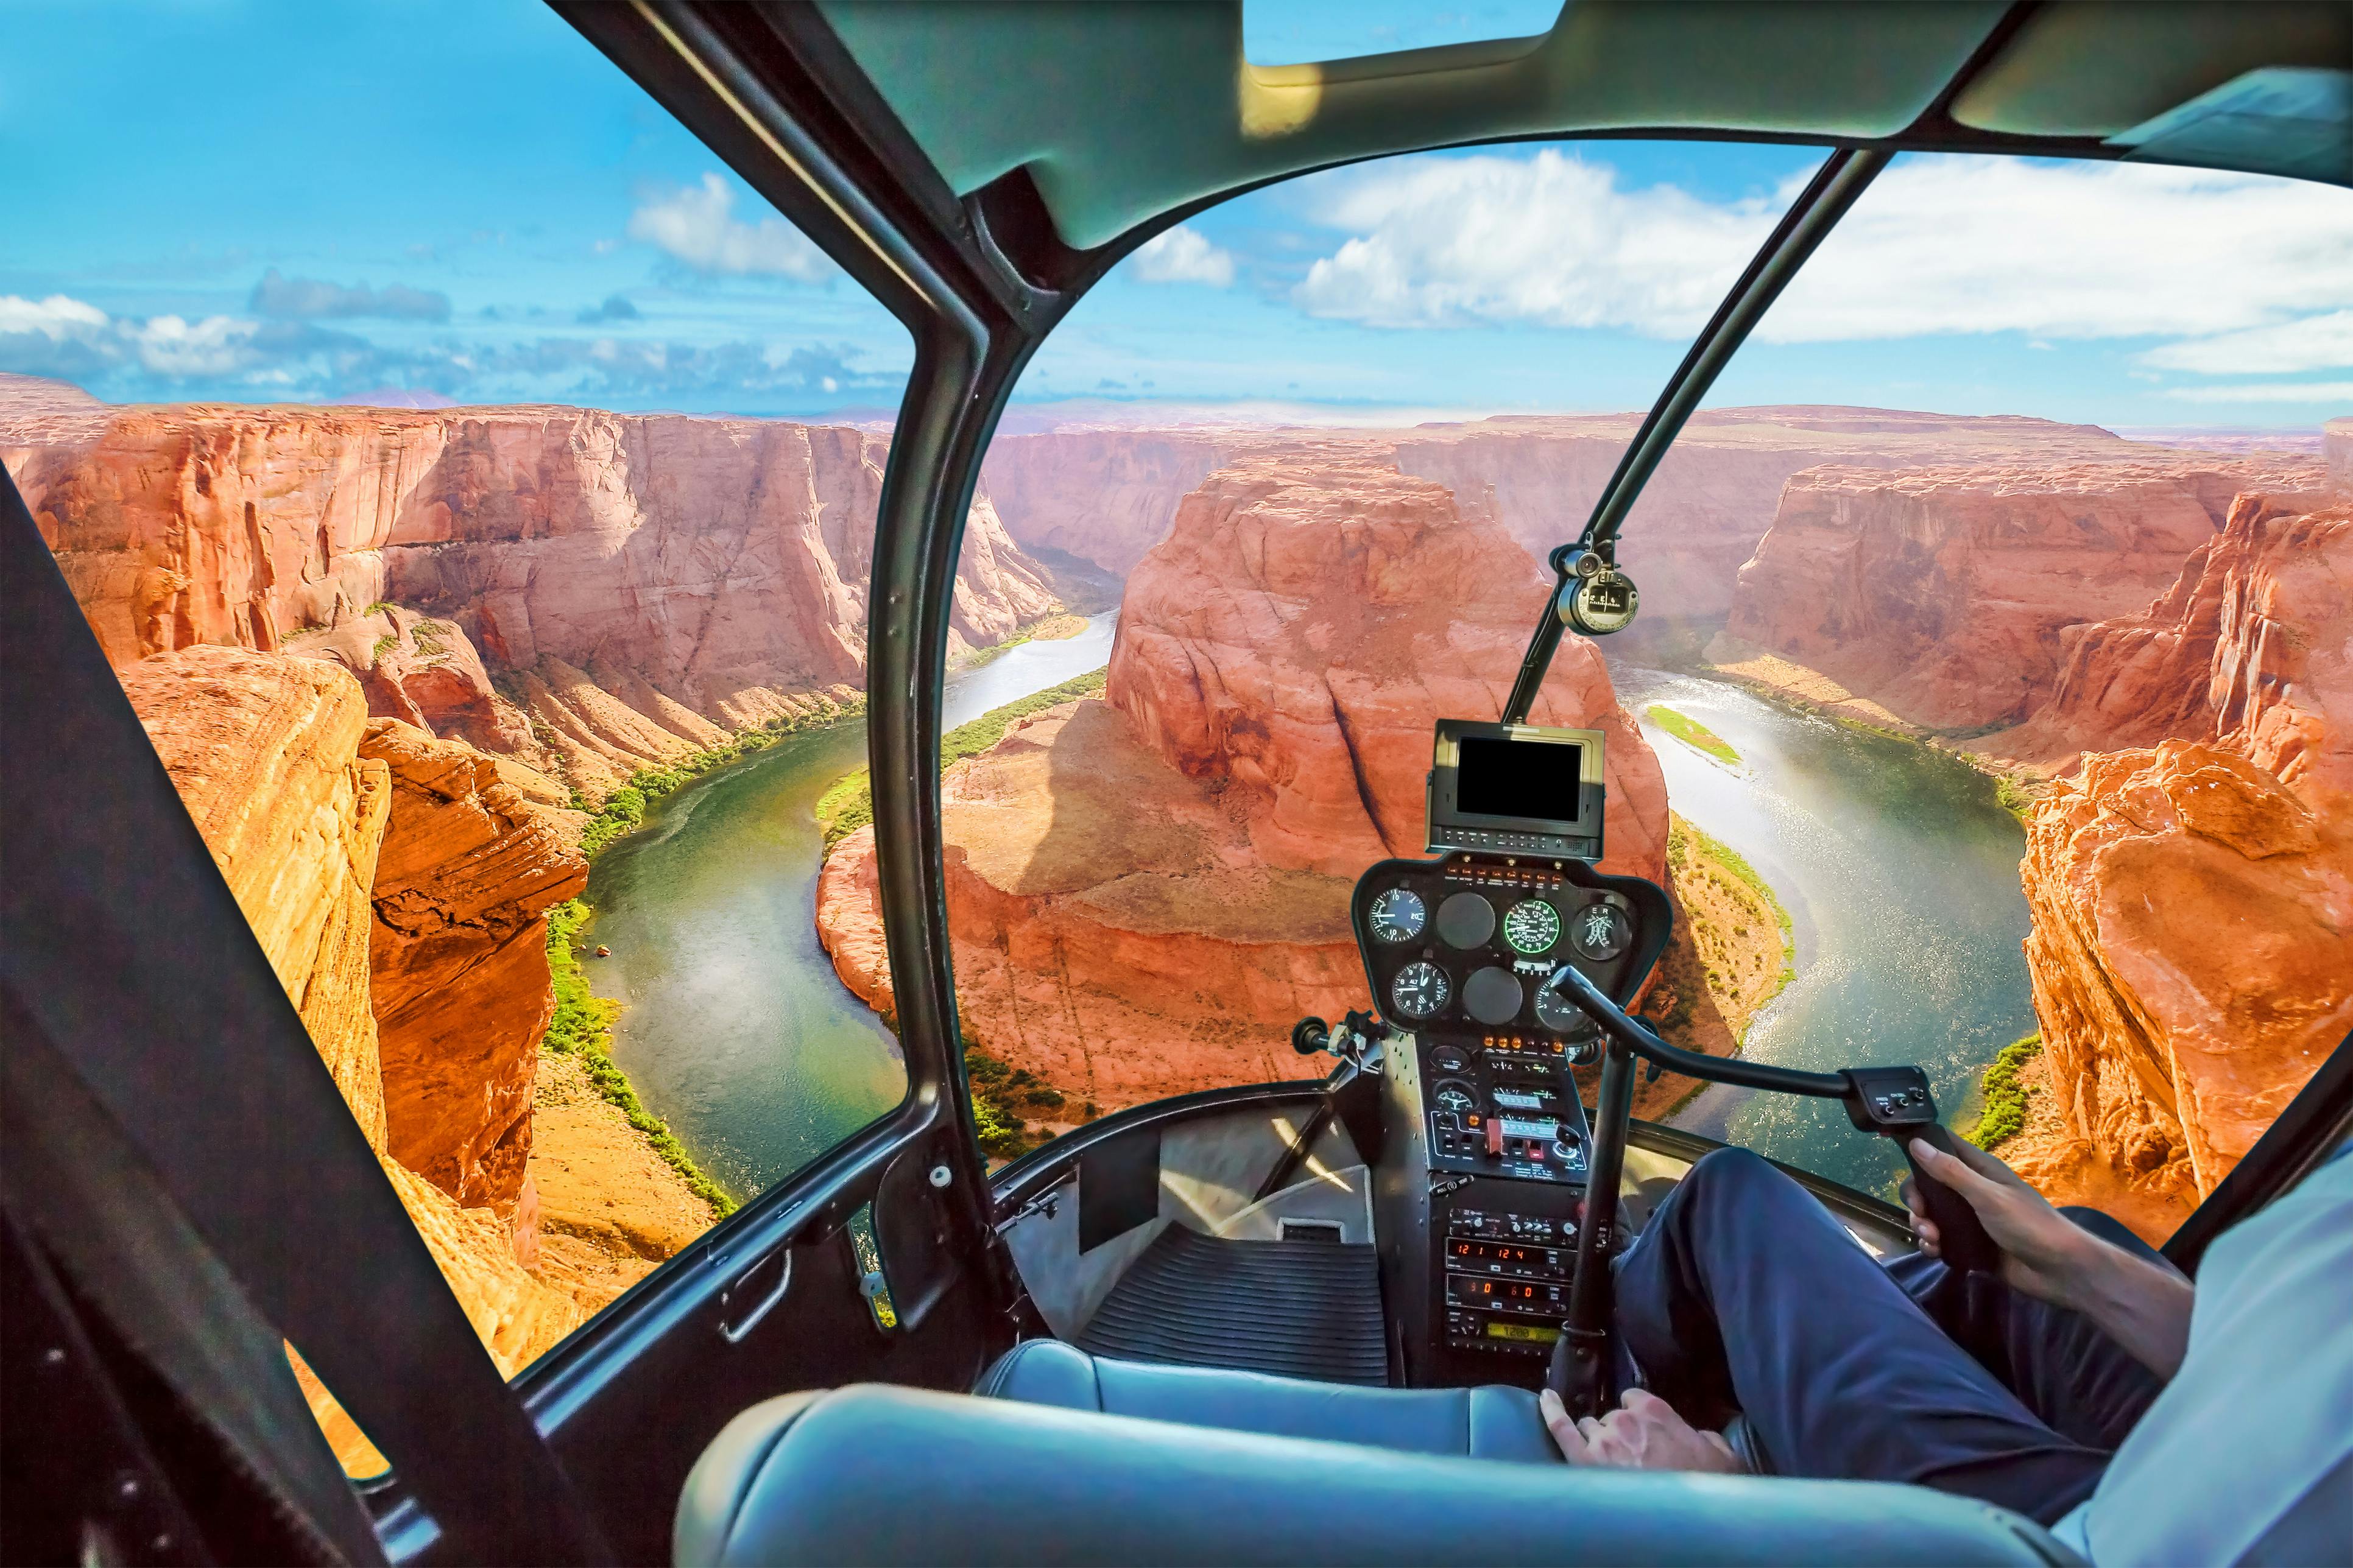 Helicopter tour of the South Rim of the Grand Canyon